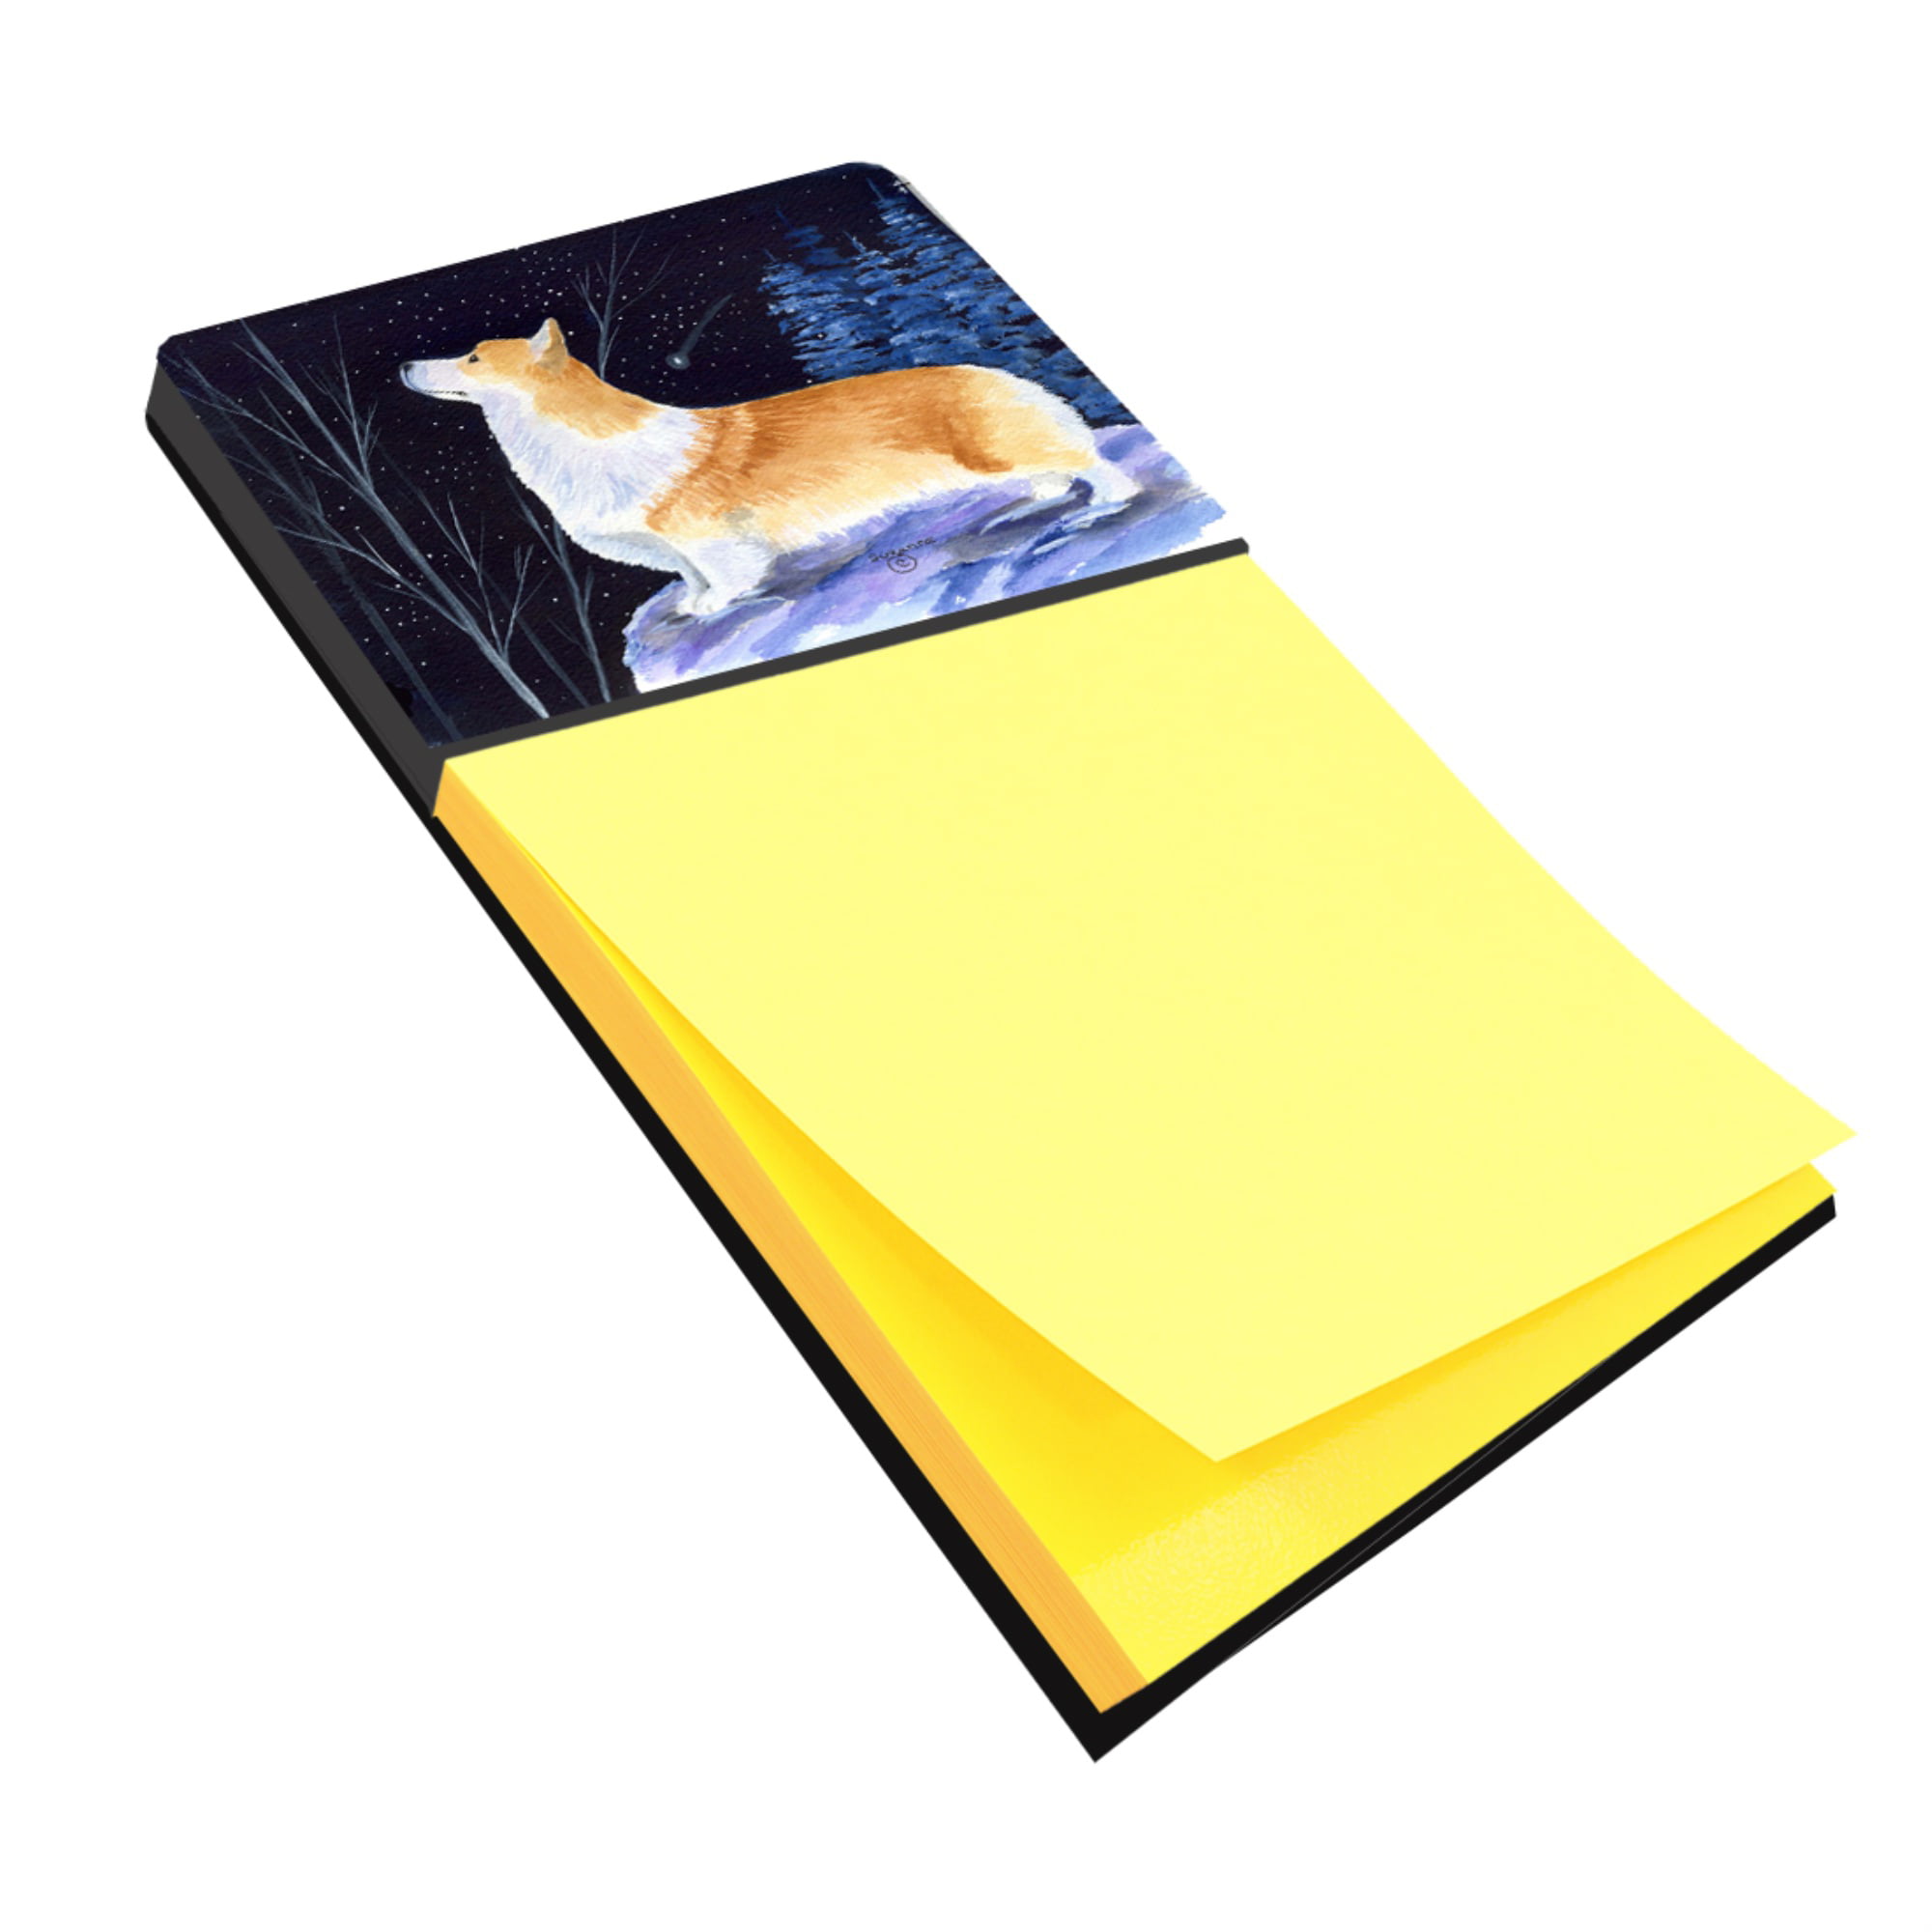 3.25 by 5.5 Multicolor Carolines Treasures English Bulldog Refillable Sticky Note Holder or Postit Note Dispenser